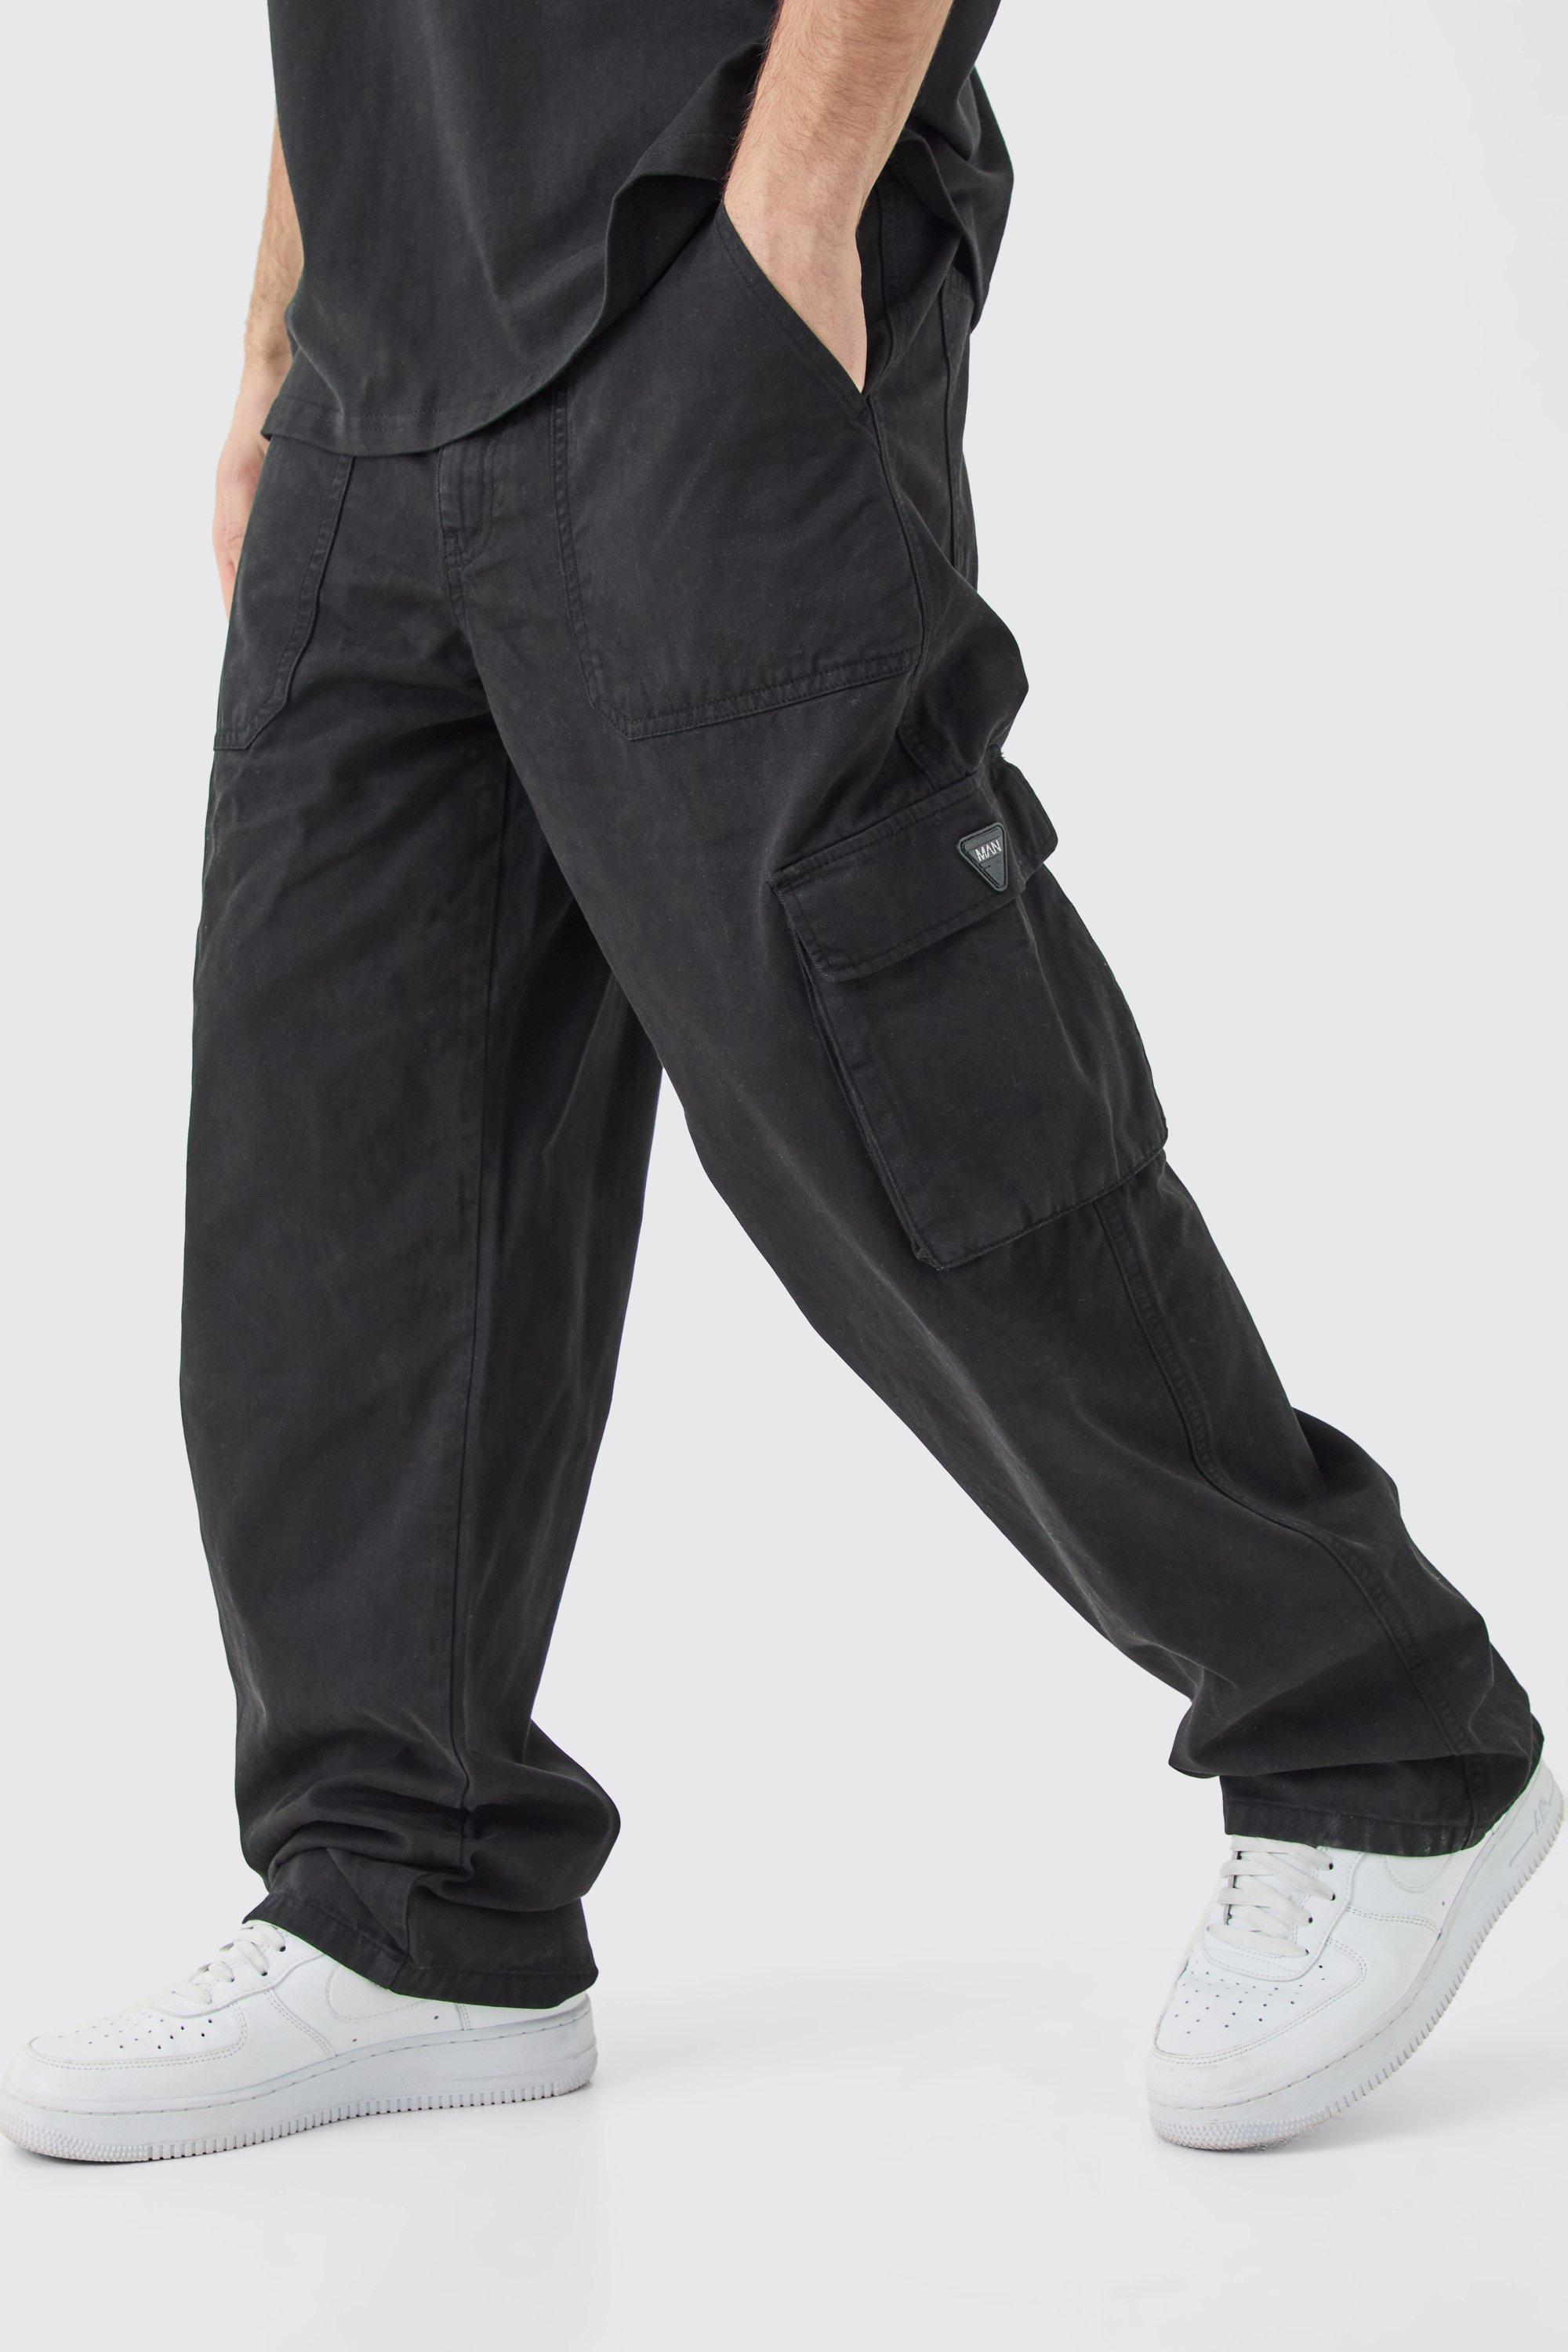 mens black fixed waist cargo zip trouser with rubberised tab, black